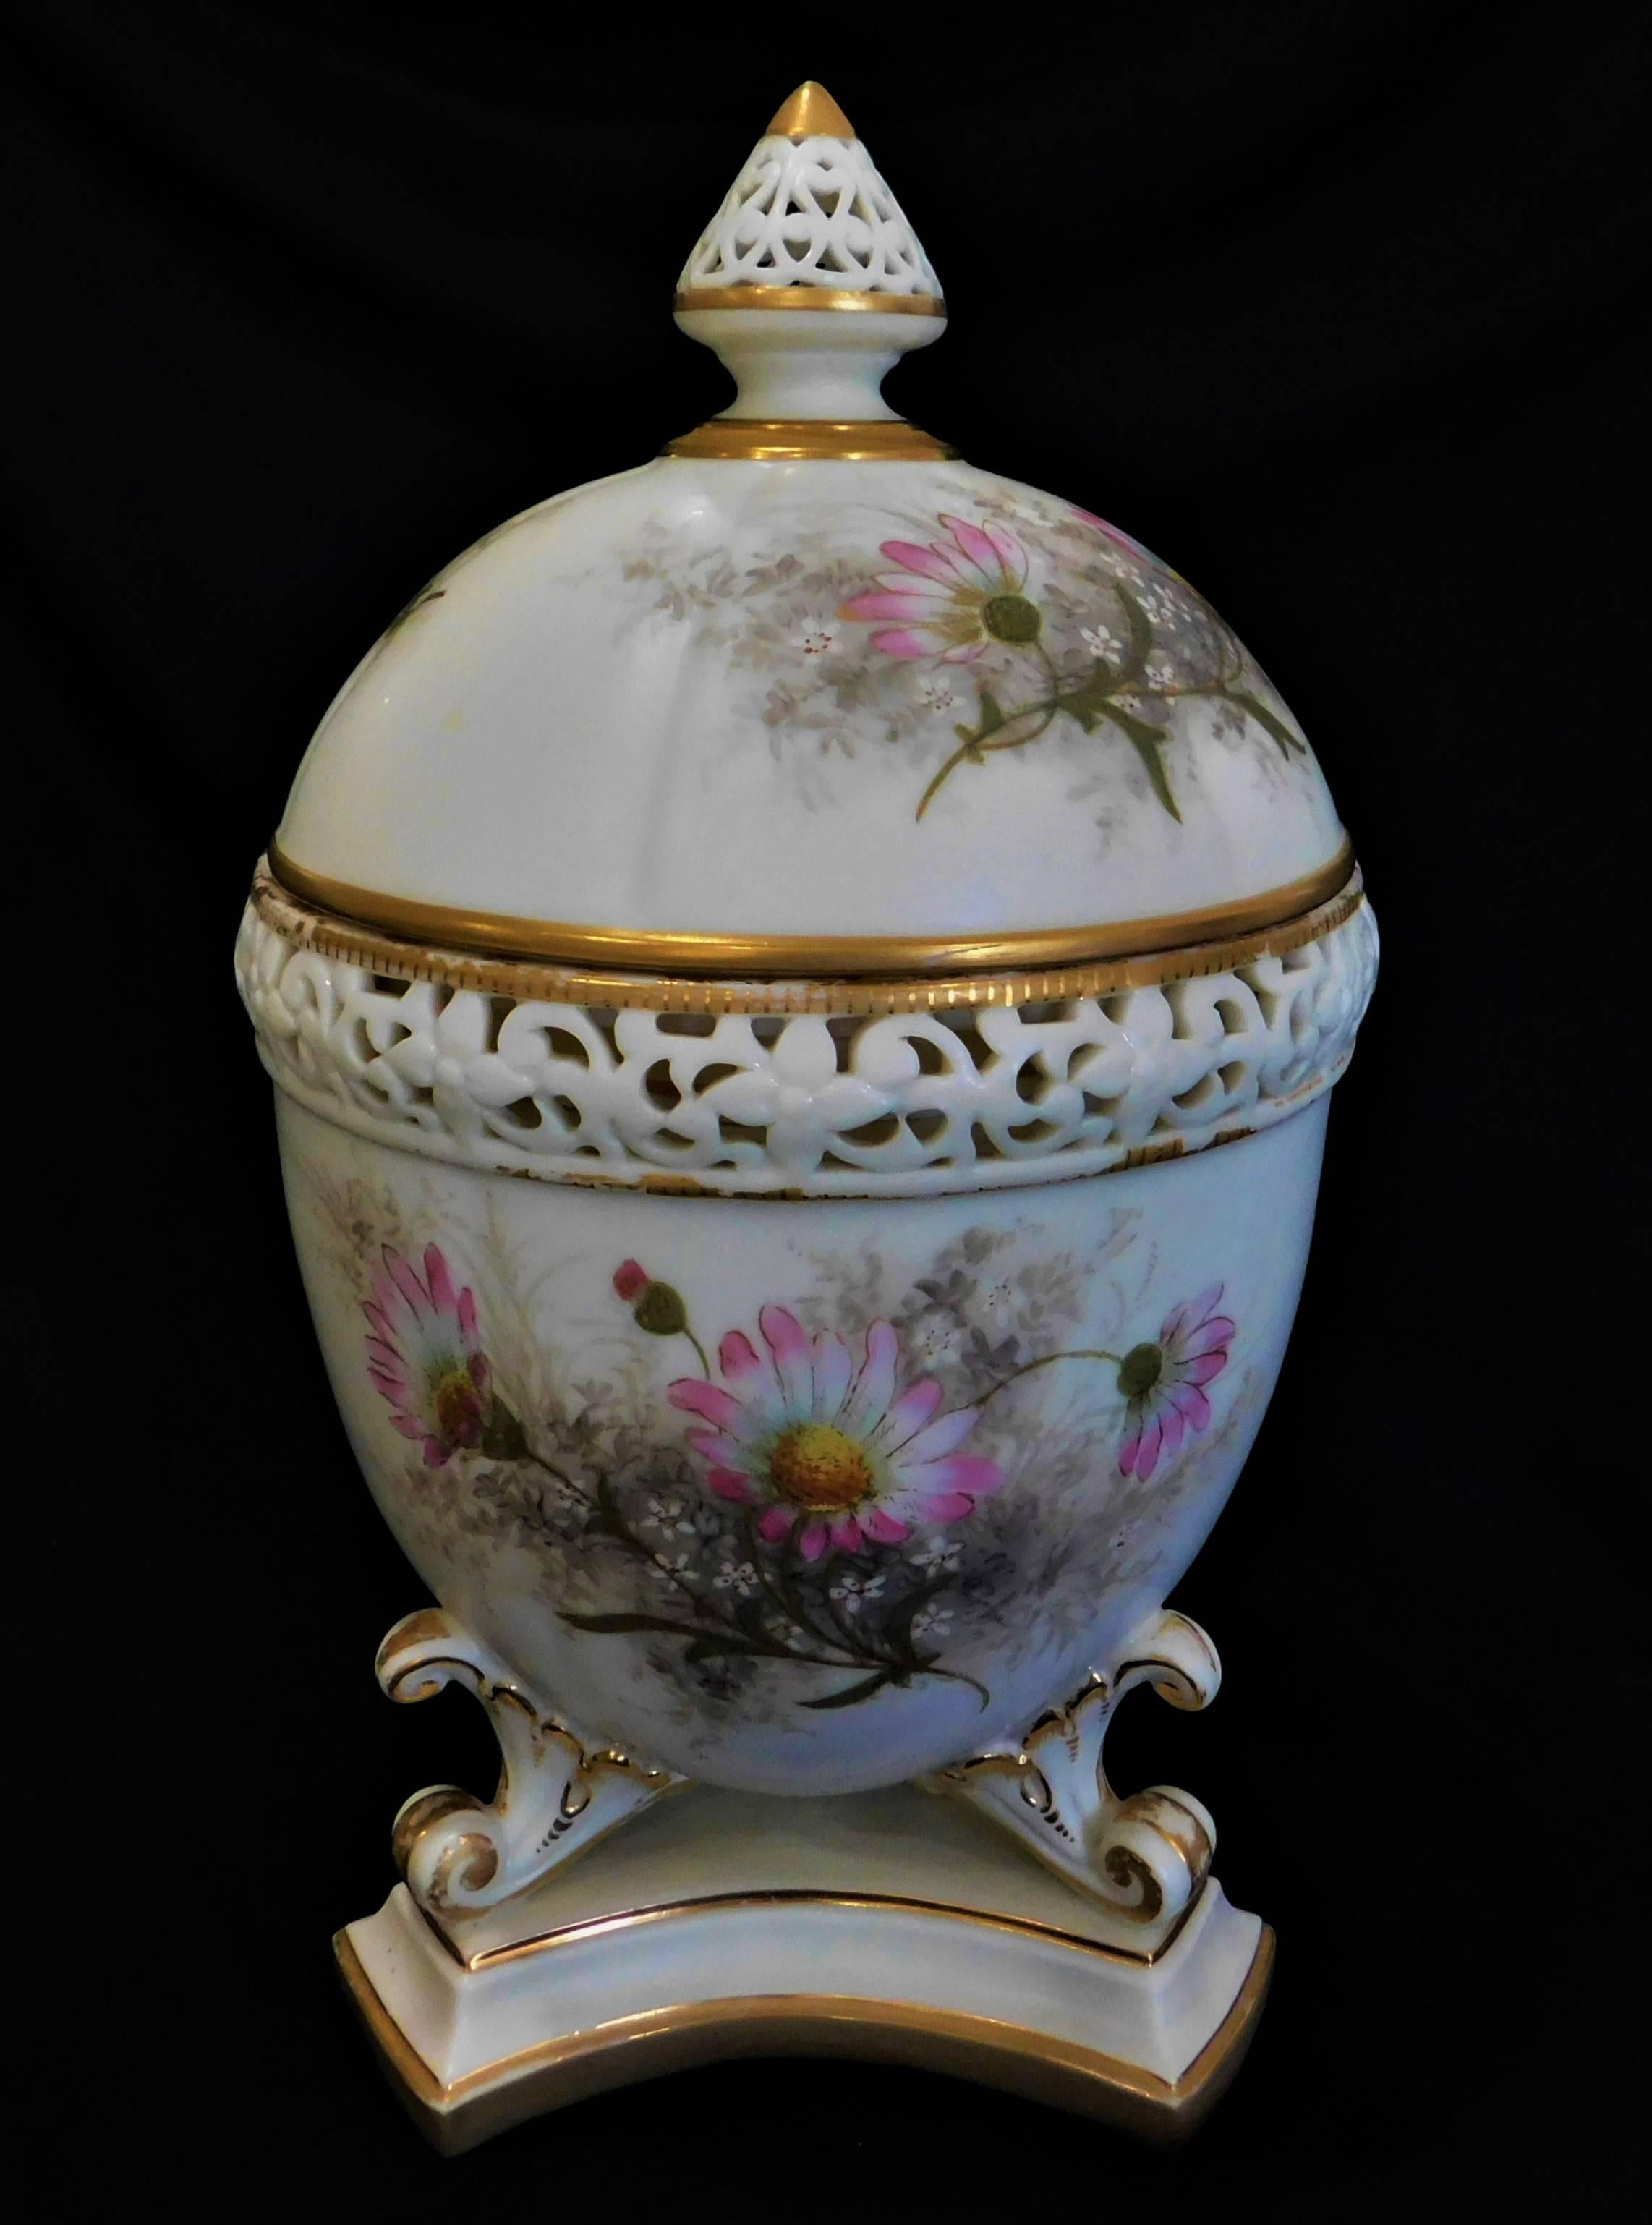 19th century Royal Worcester lidded potpourri porcelain jar, lid and cover, decorated with domed cover and interior lid, surrounded by a pierced border, the body painted with flowers and foliage, on three scrolled feet on trefoil foot.